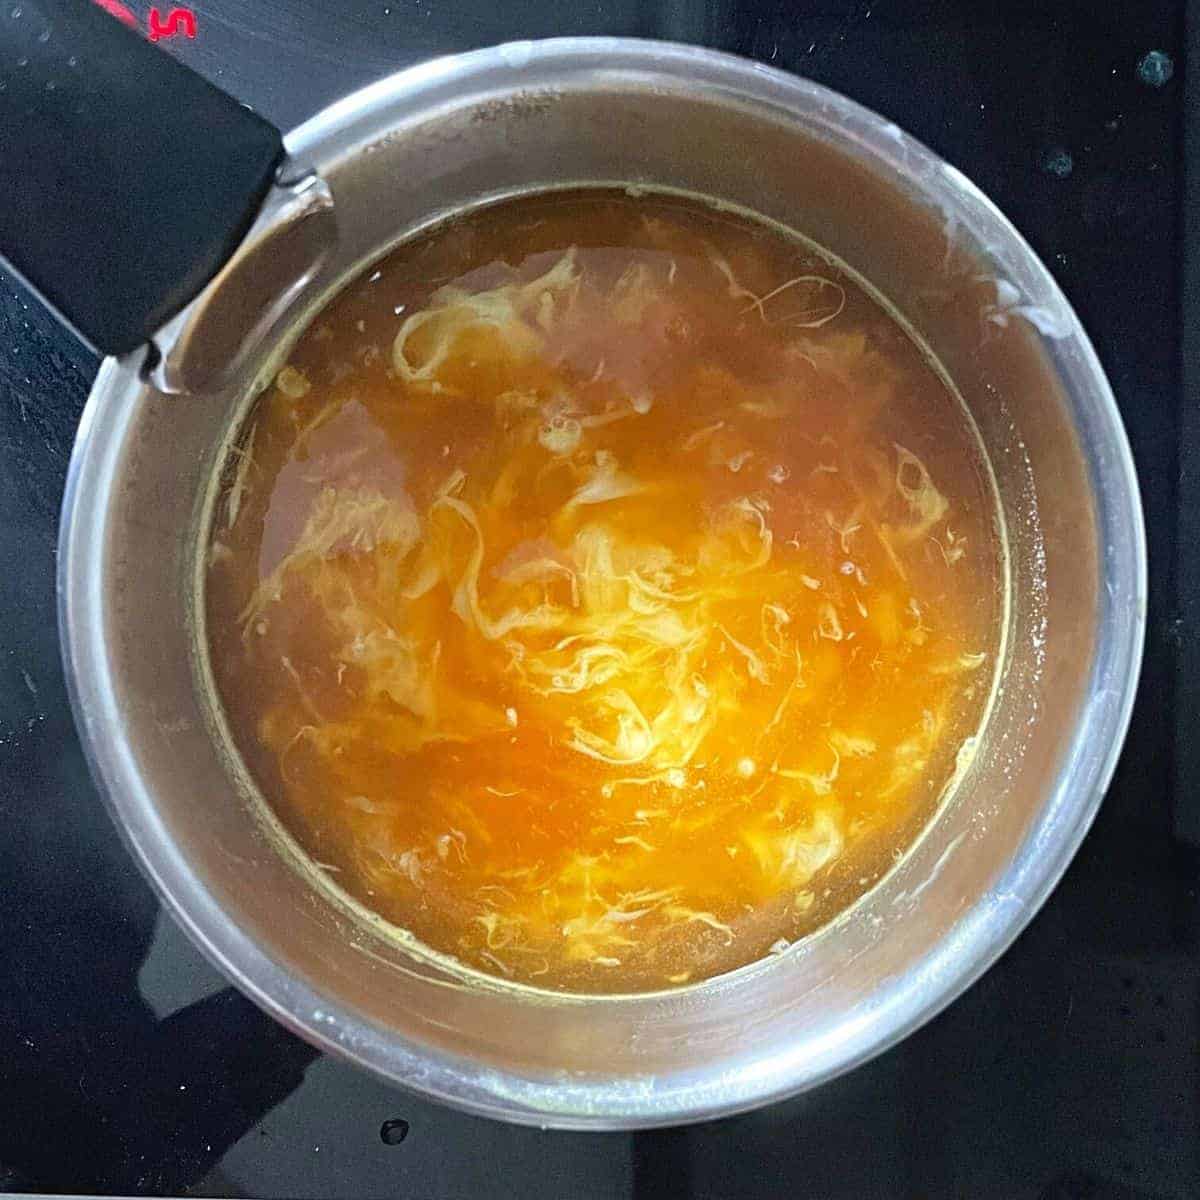 Ribbons in the egg flower soup